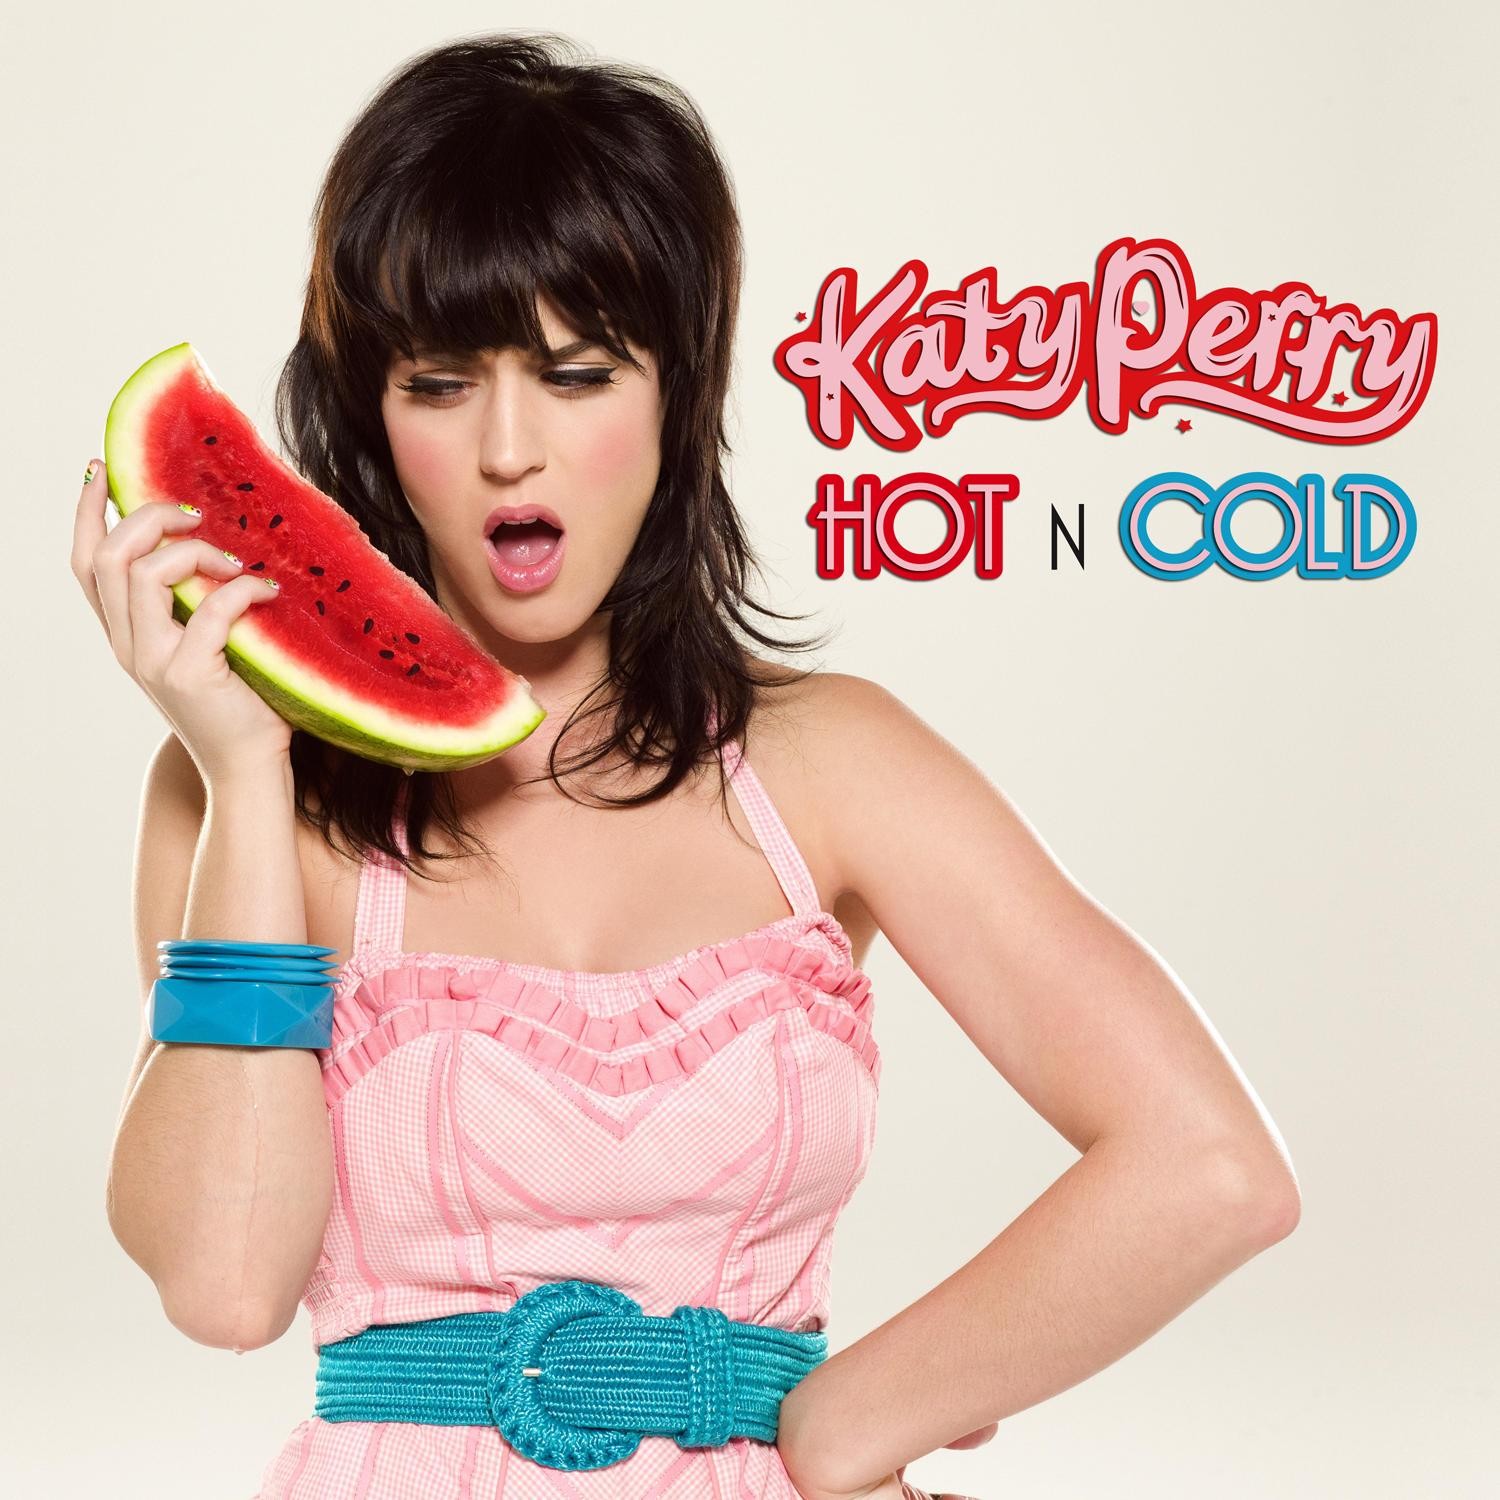  Girl Cover Photo Facebook on Katy Perry Hot And Cold Single Cover Watermelon